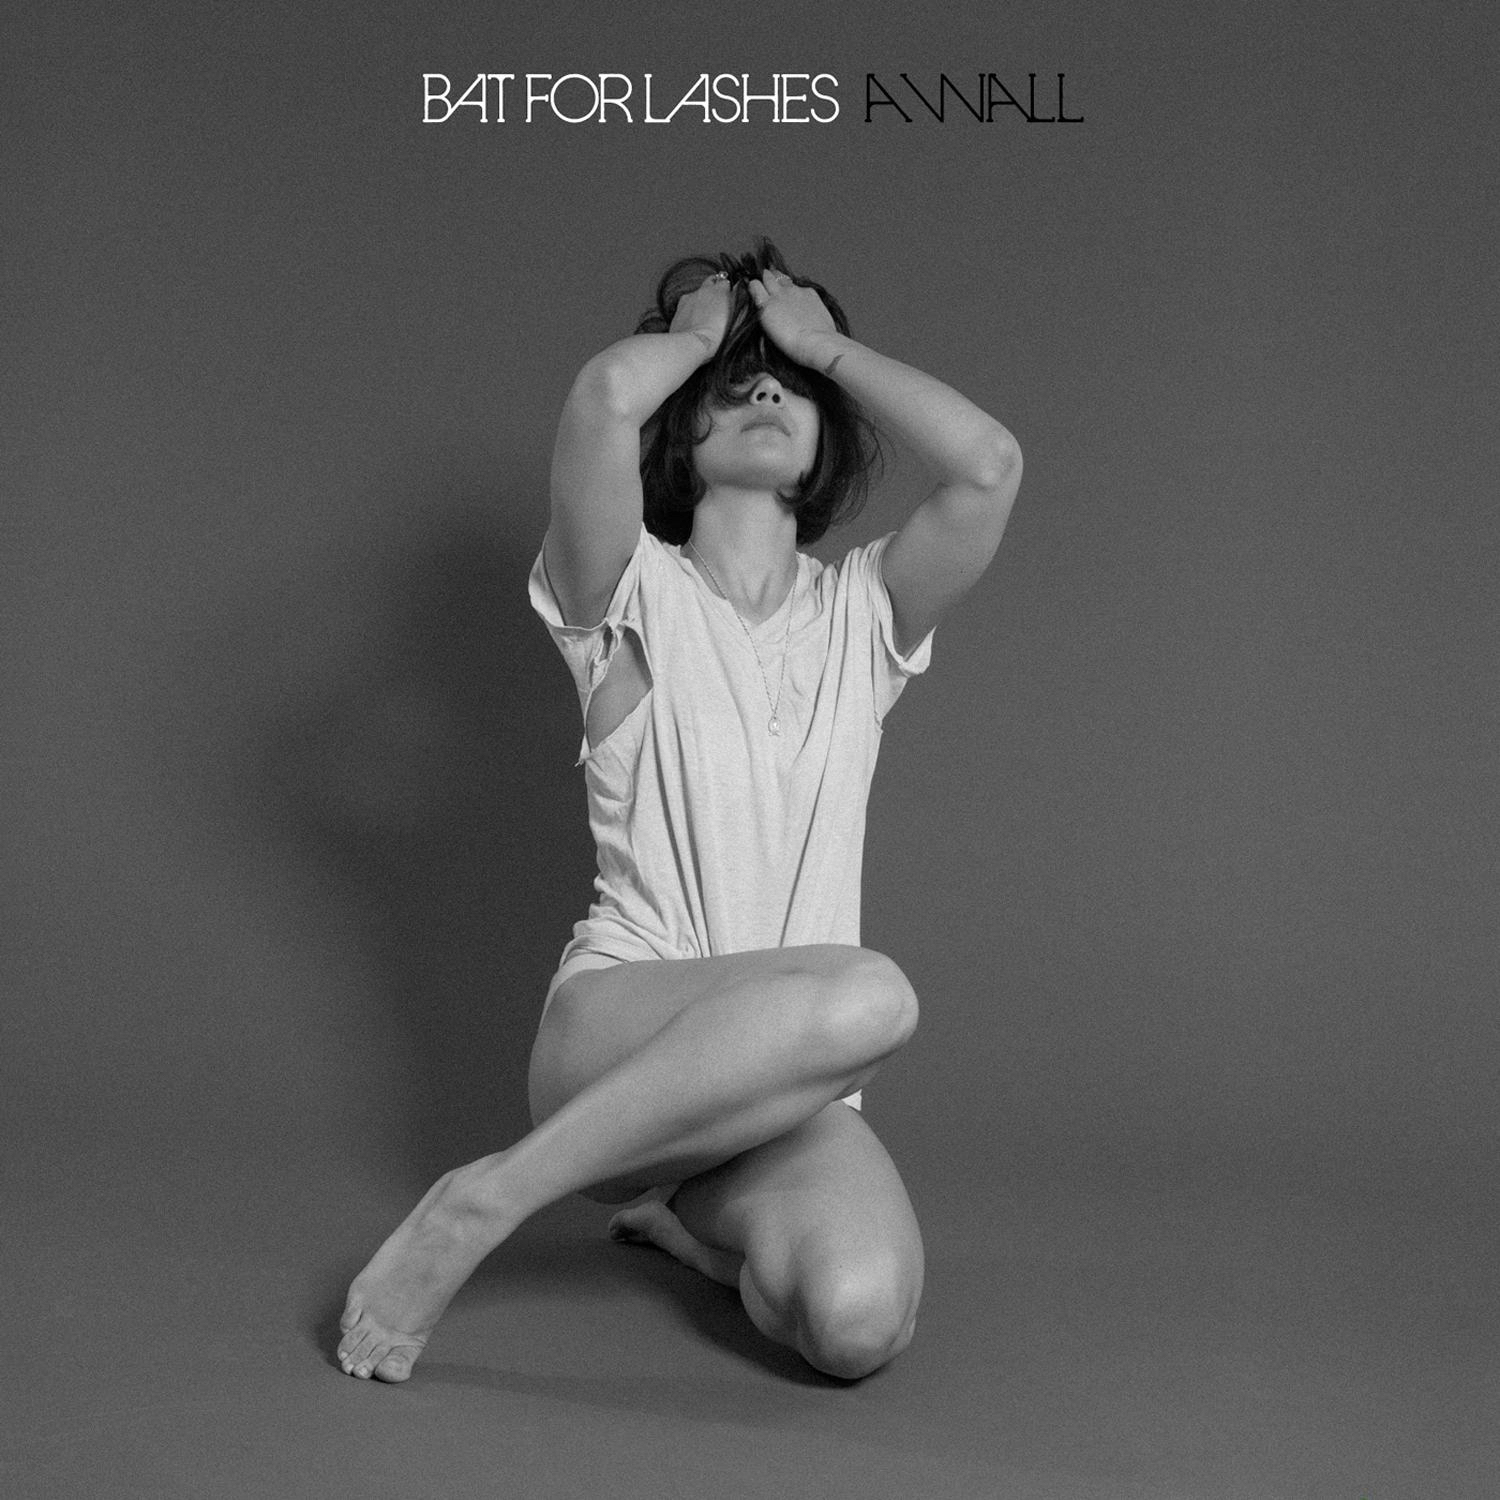 Bat for Lashes A Wall cover artwork